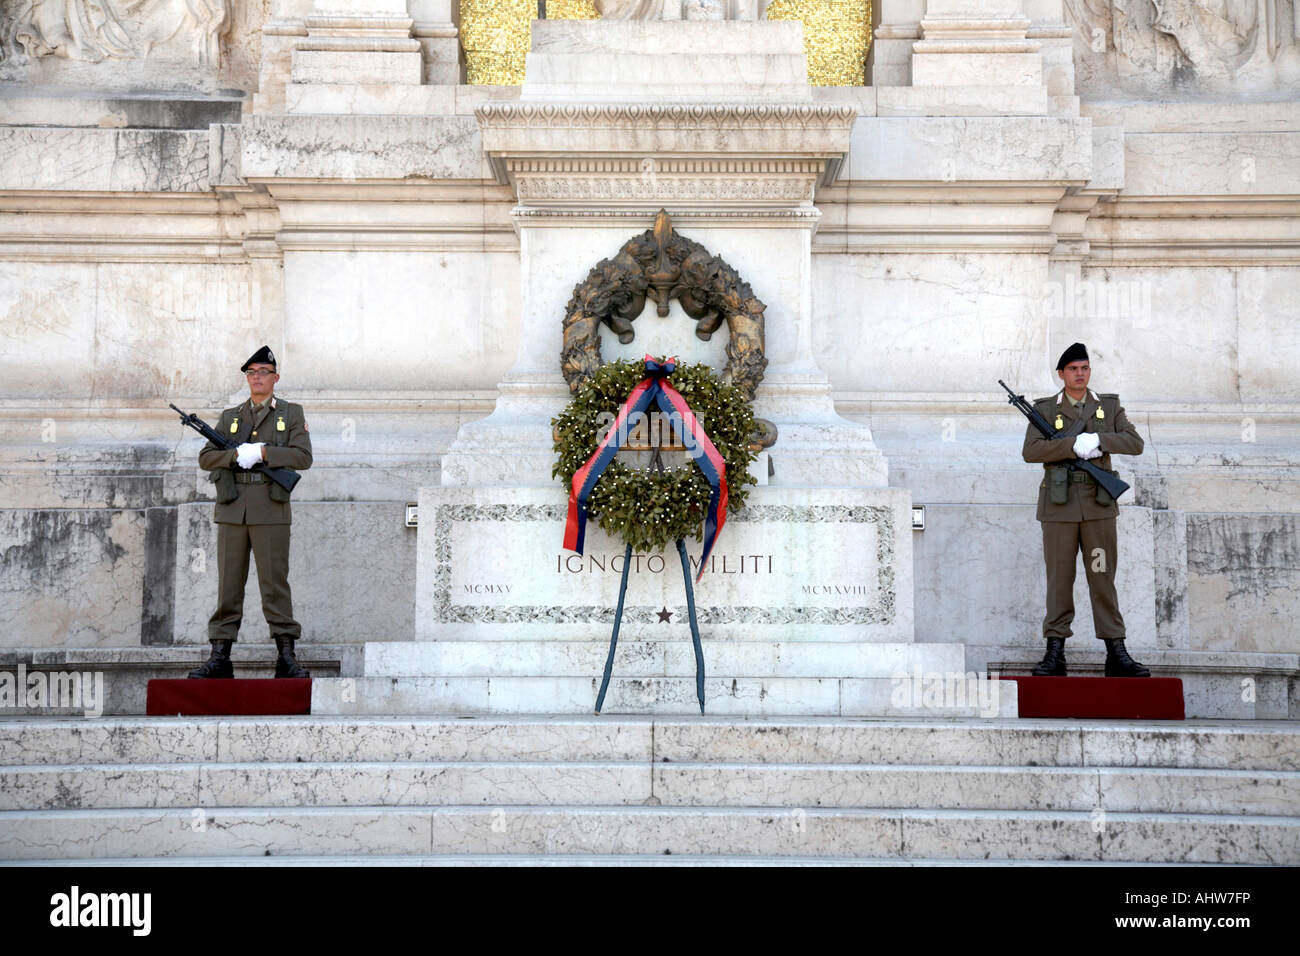 Two Italian army officers guard the wreaths at the Monument Vittorio Emanuele II in Rome Lazio Italy Stock Photo